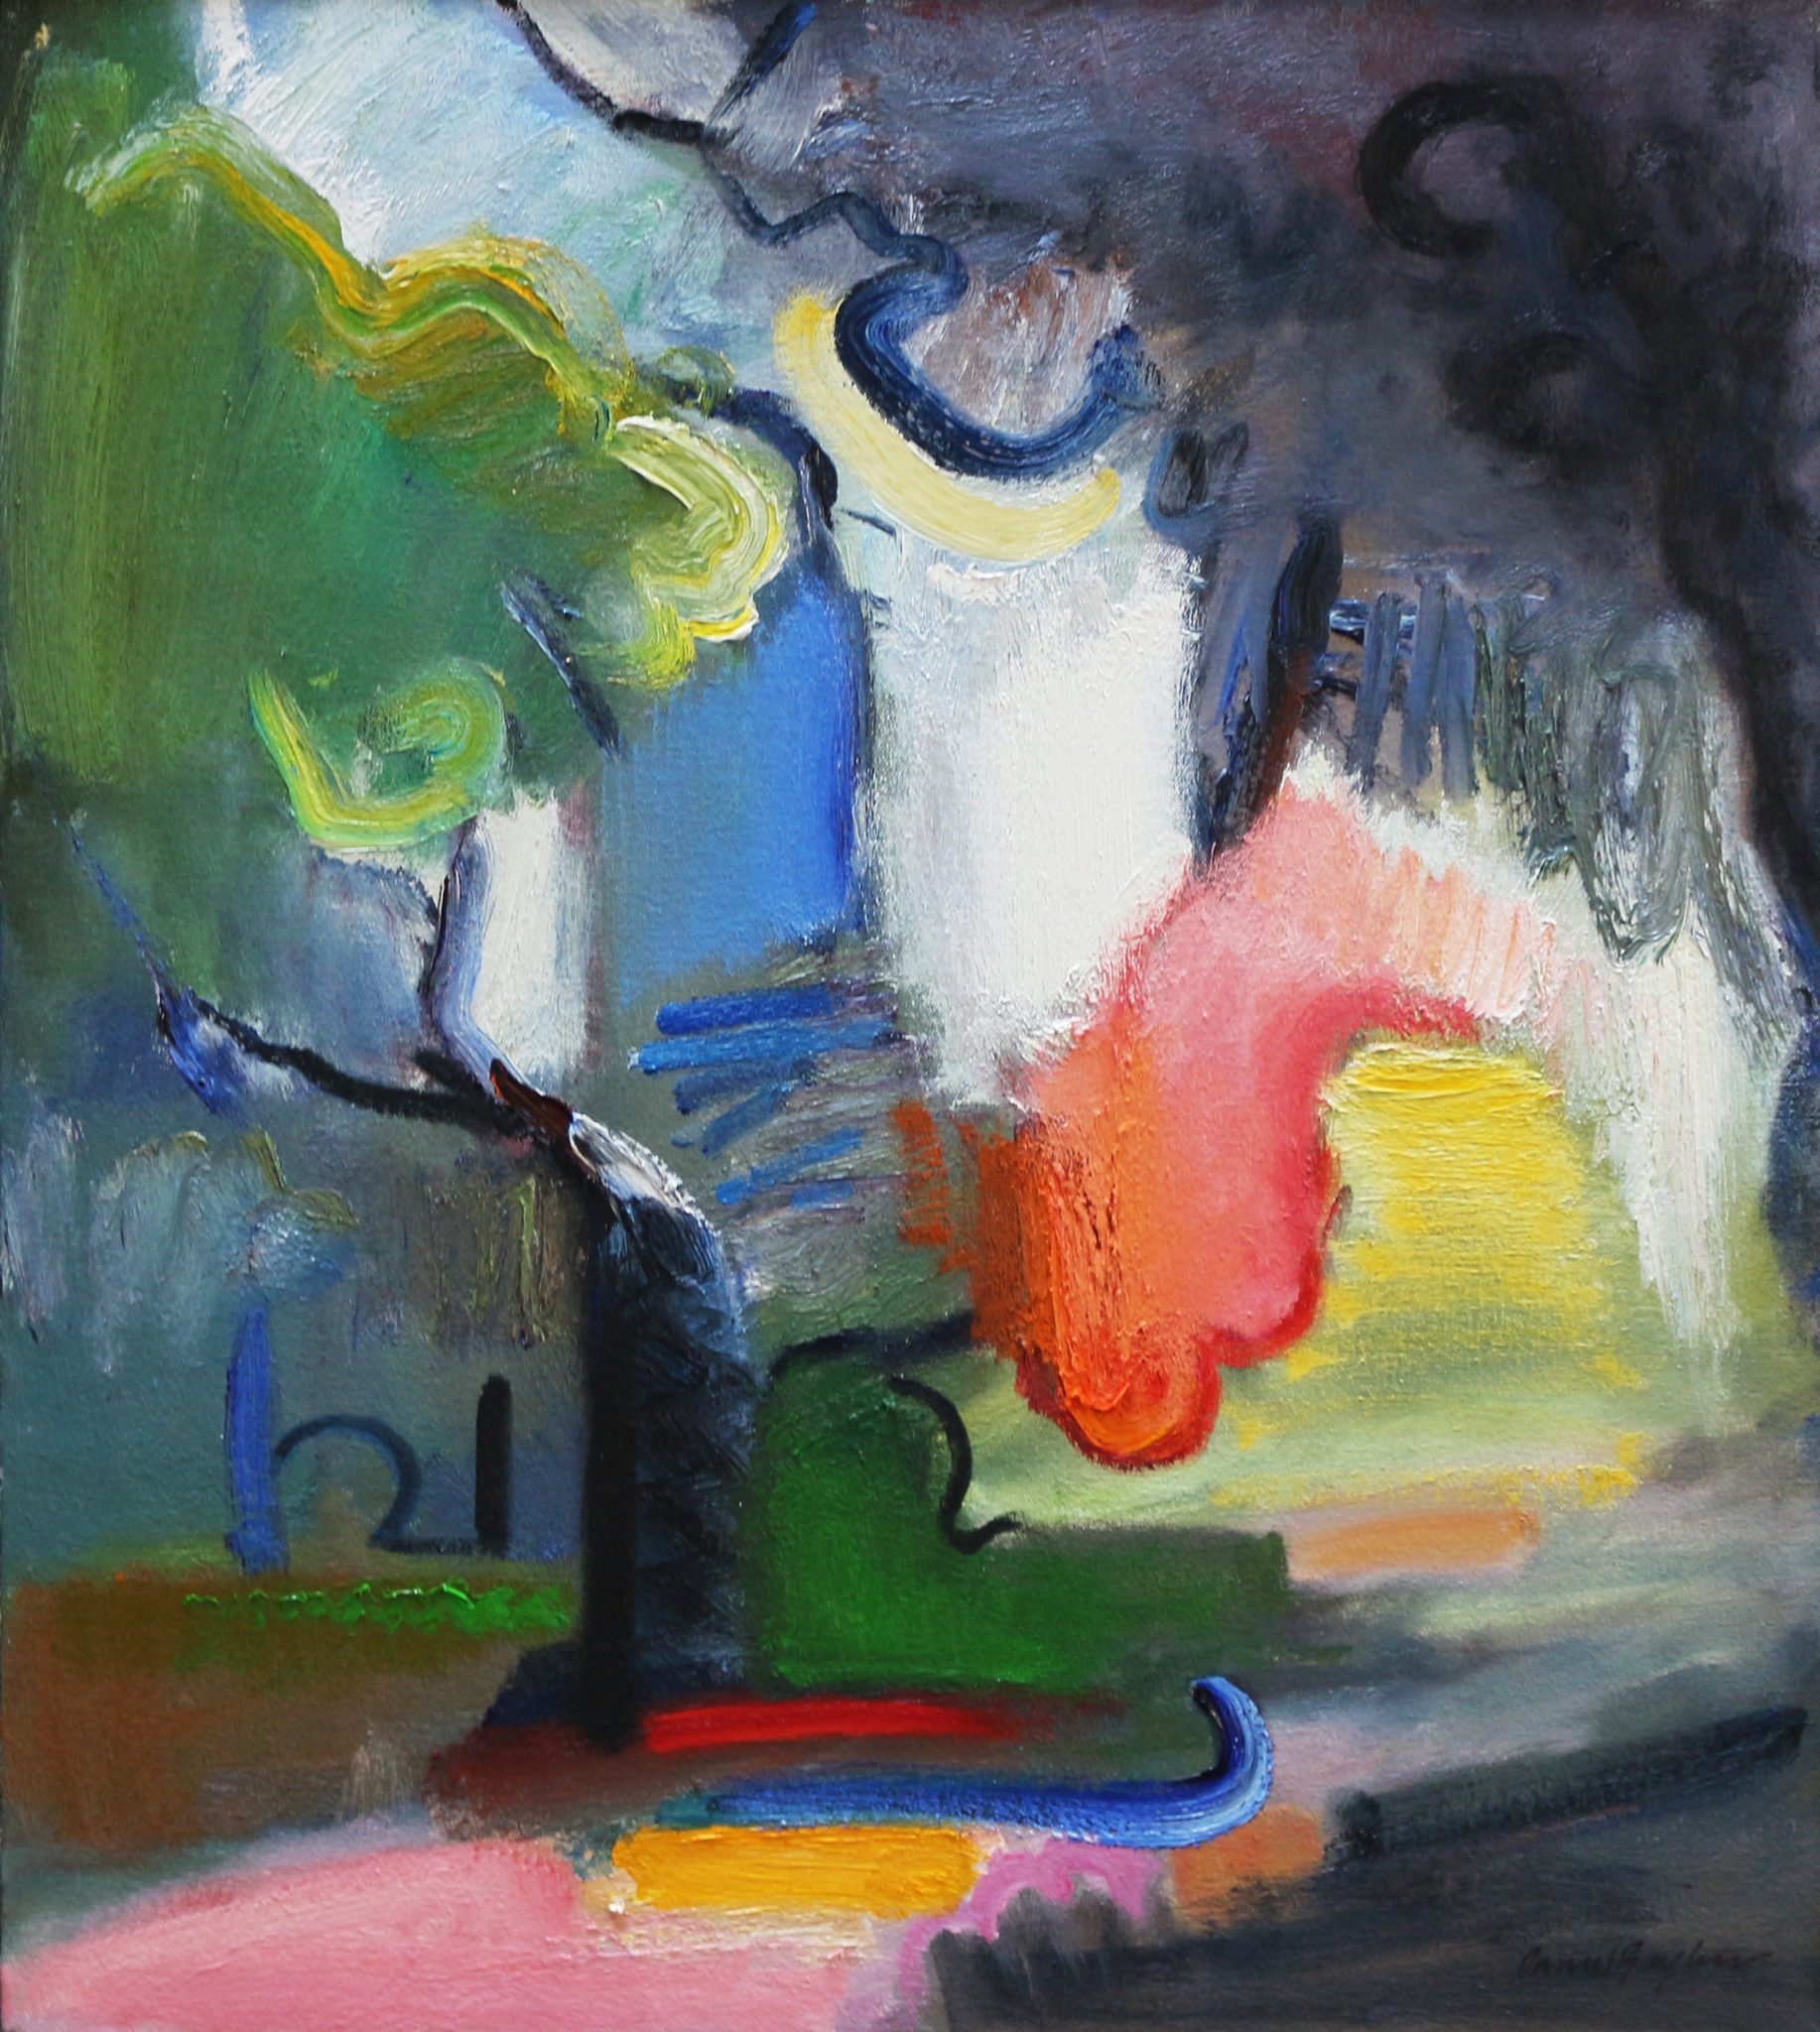 Oil on canvas painting by Daniel Bayless showing an artistic view of a tree after the rain